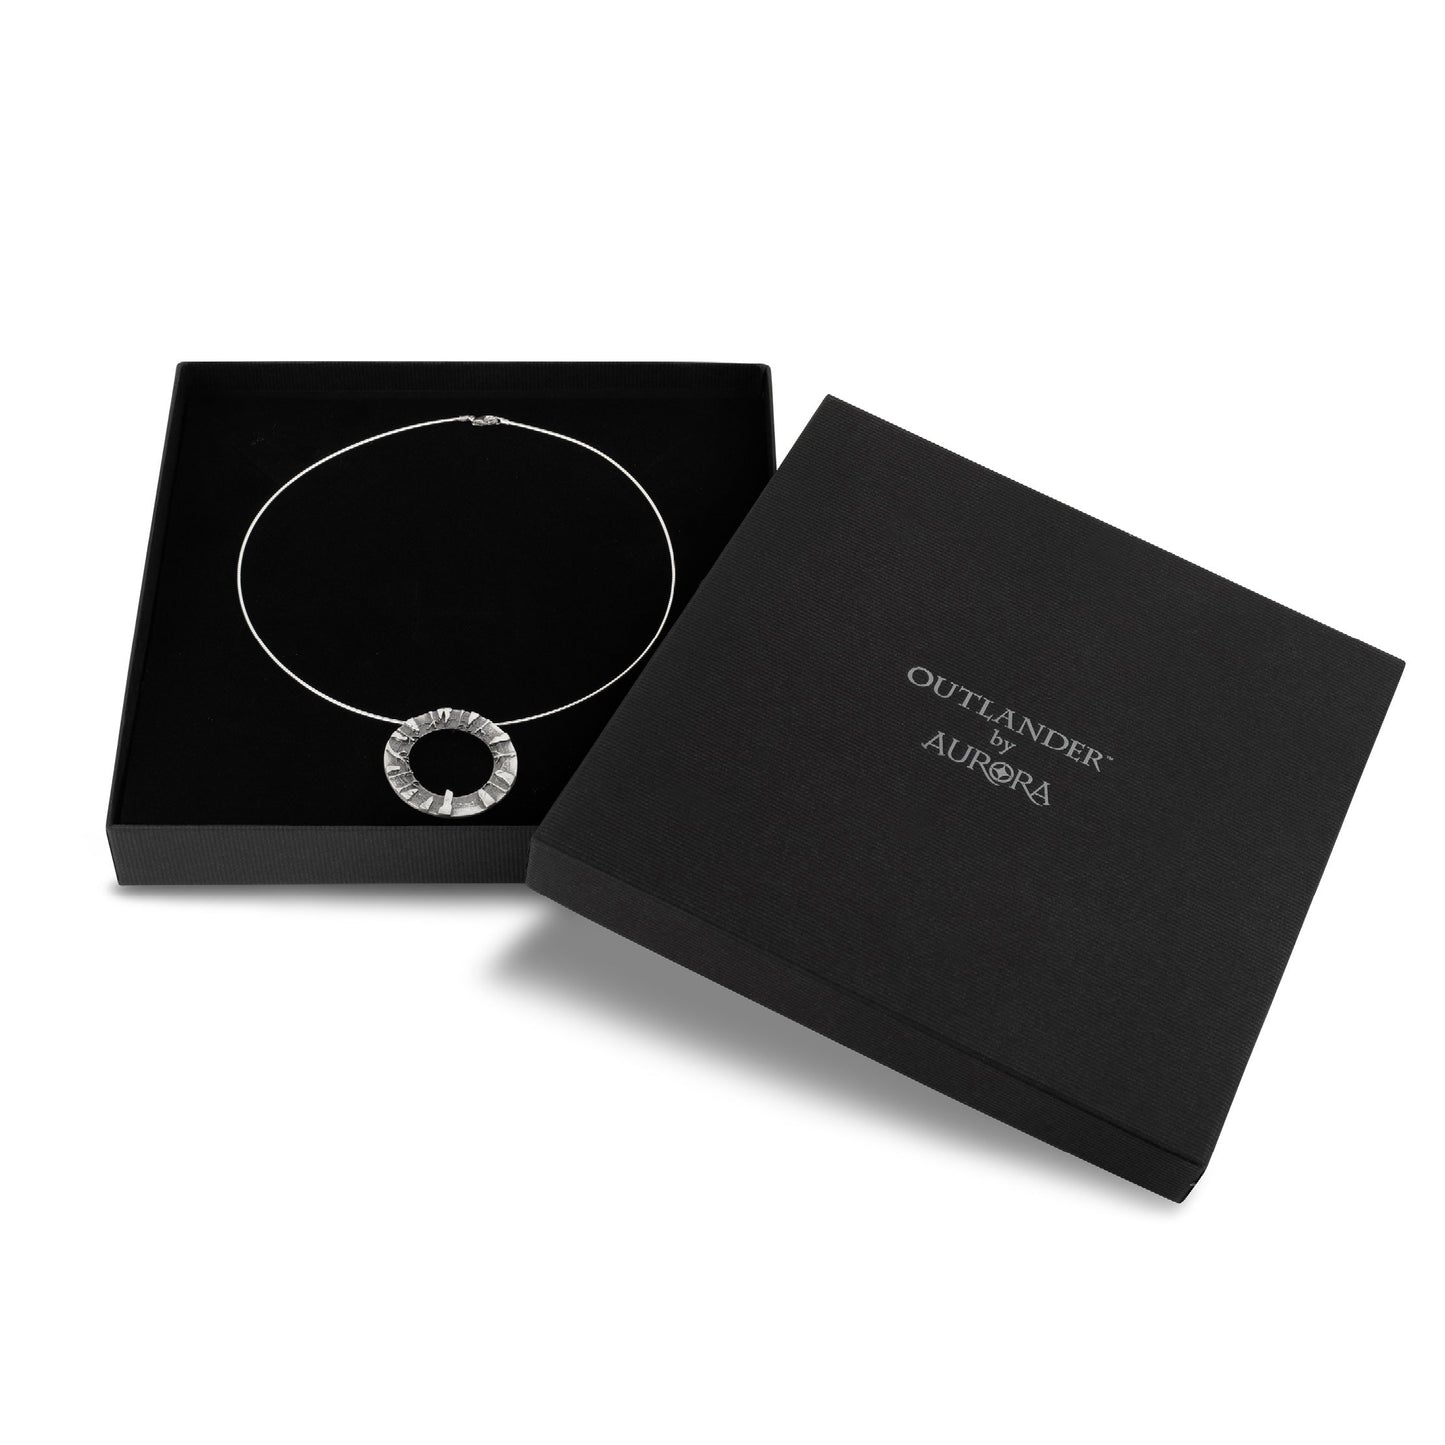 Based on the Craigh na Dun stone circle featured in the Outlander TV series, Sterling Silver Neckwire, in a box handmade by Aurora Jewellery Orkney, Scotland